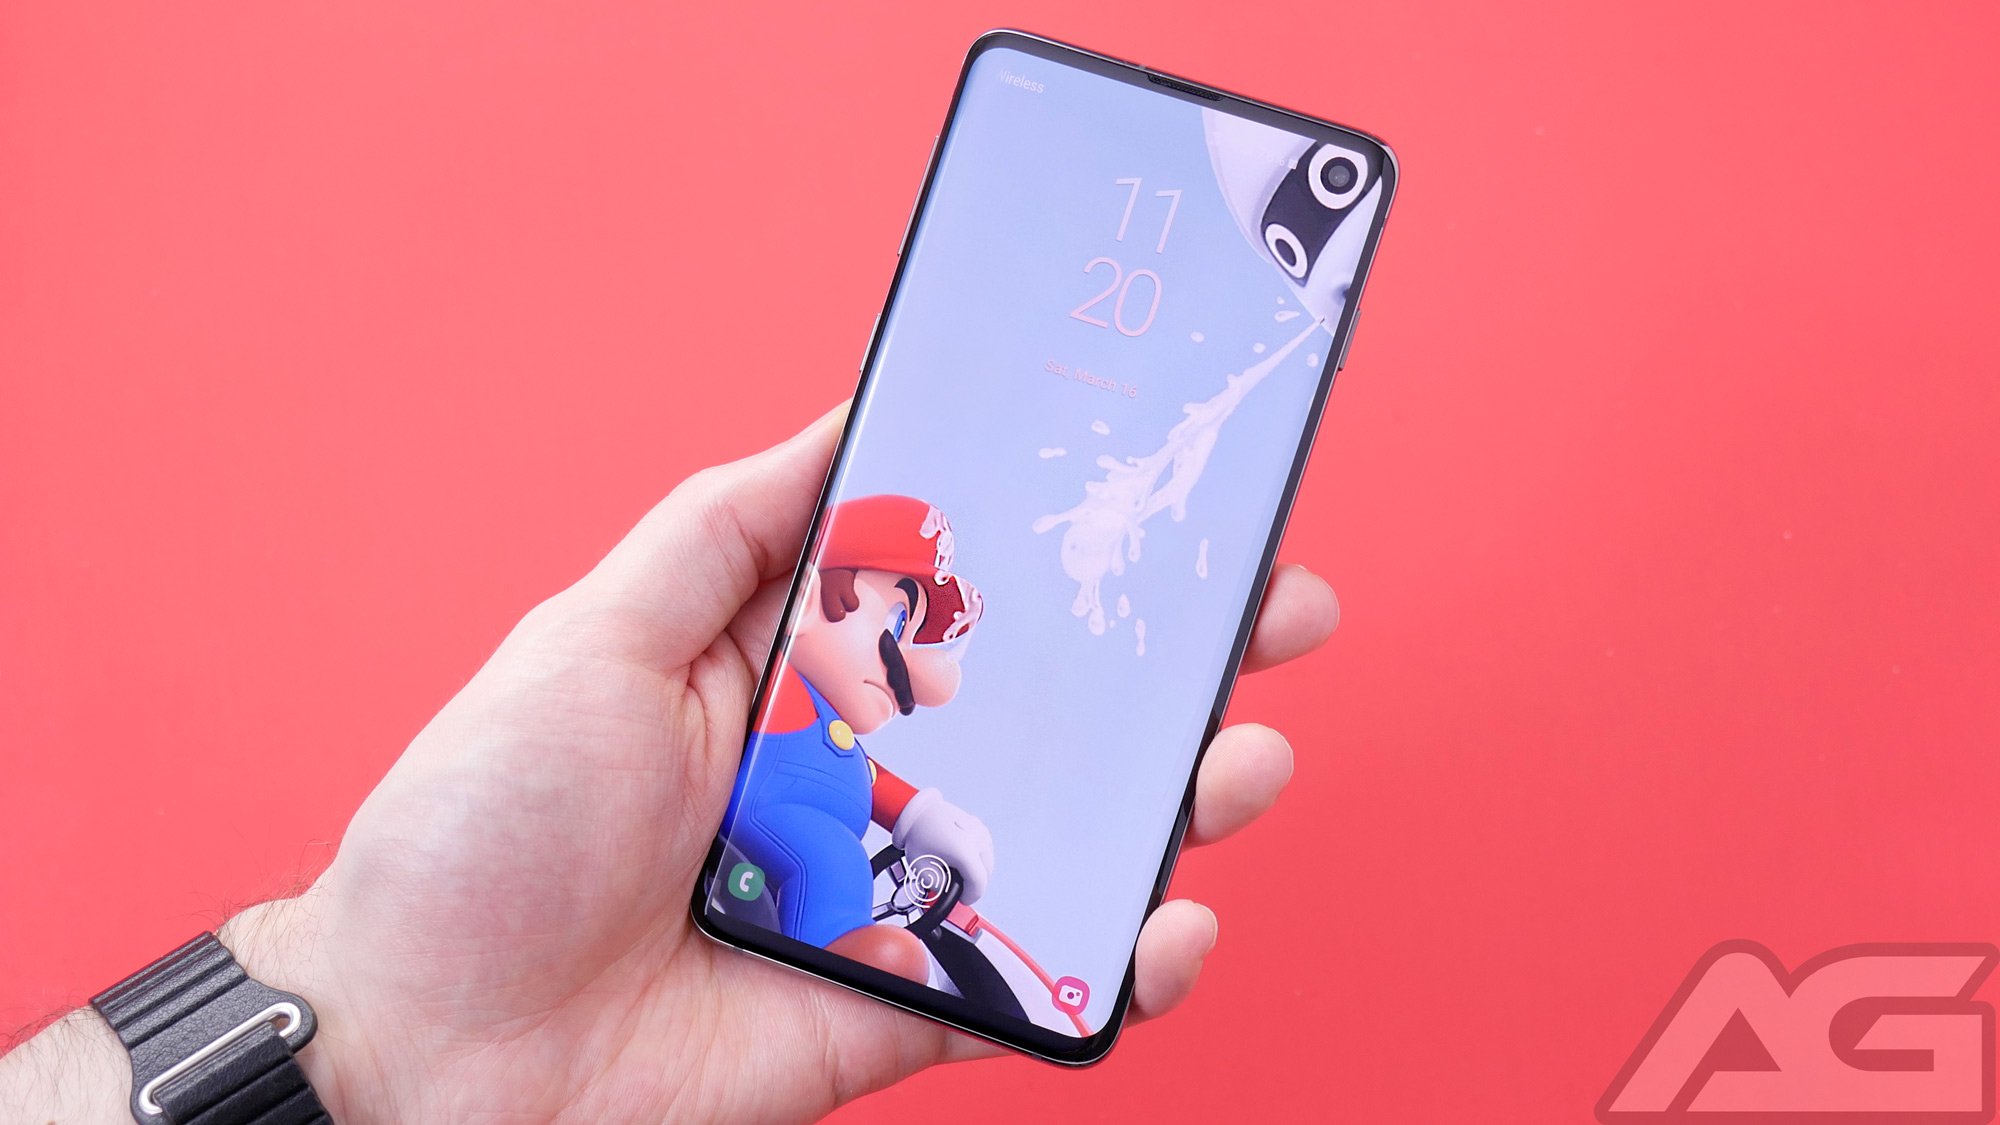 Check out these hilarious Galaxy S10 and S10 Plus camera wallpapers